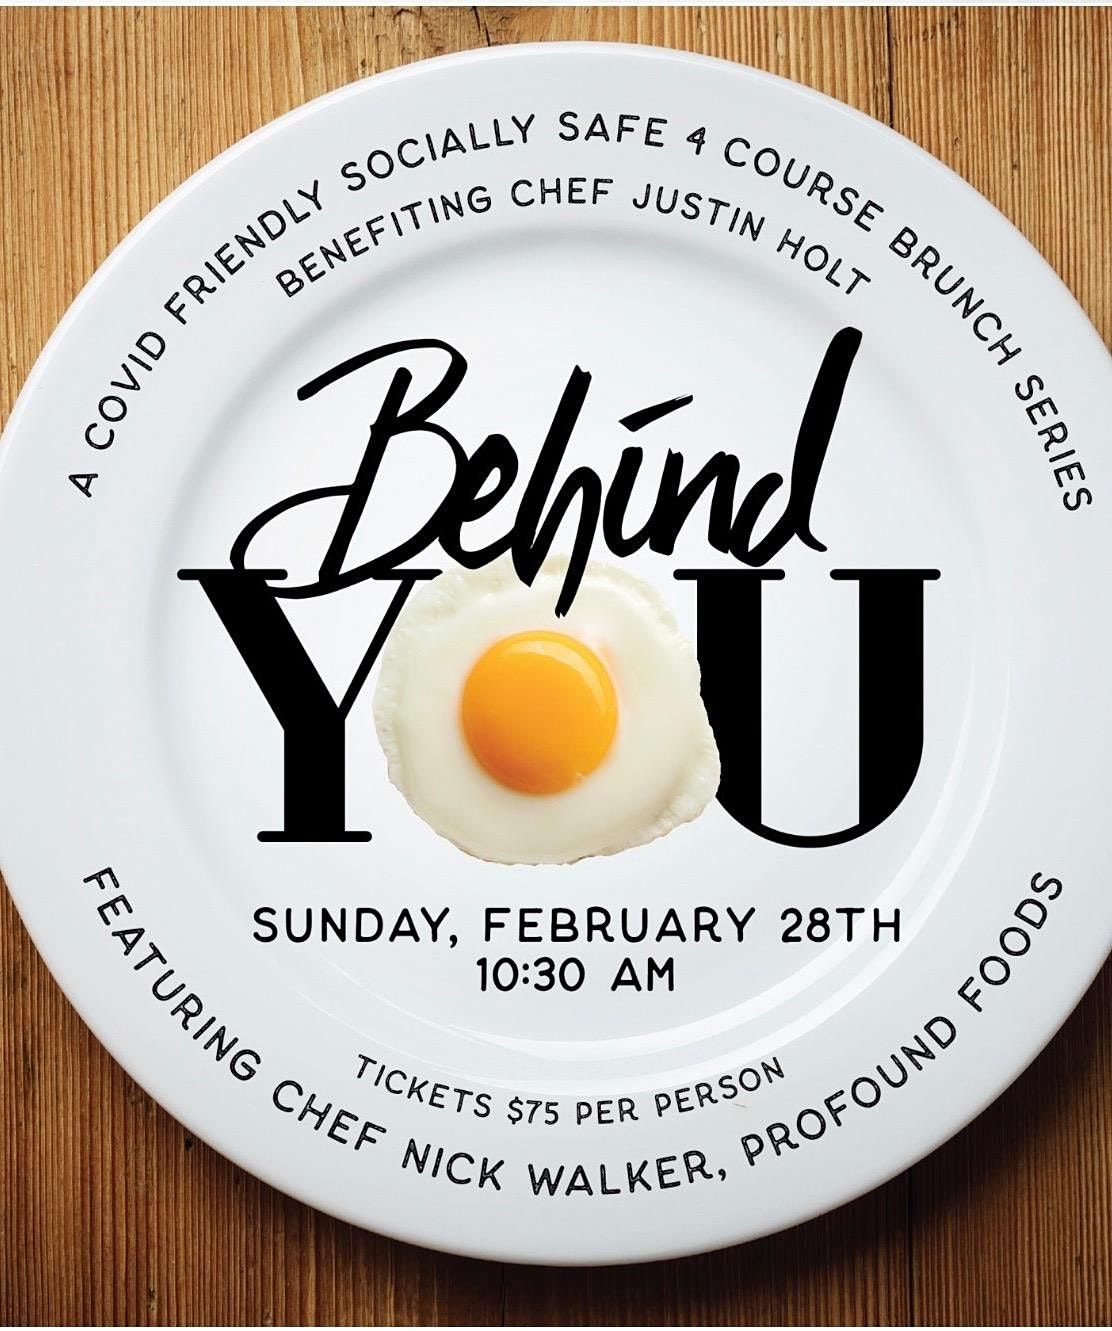 The "Behind You" Brunch Series